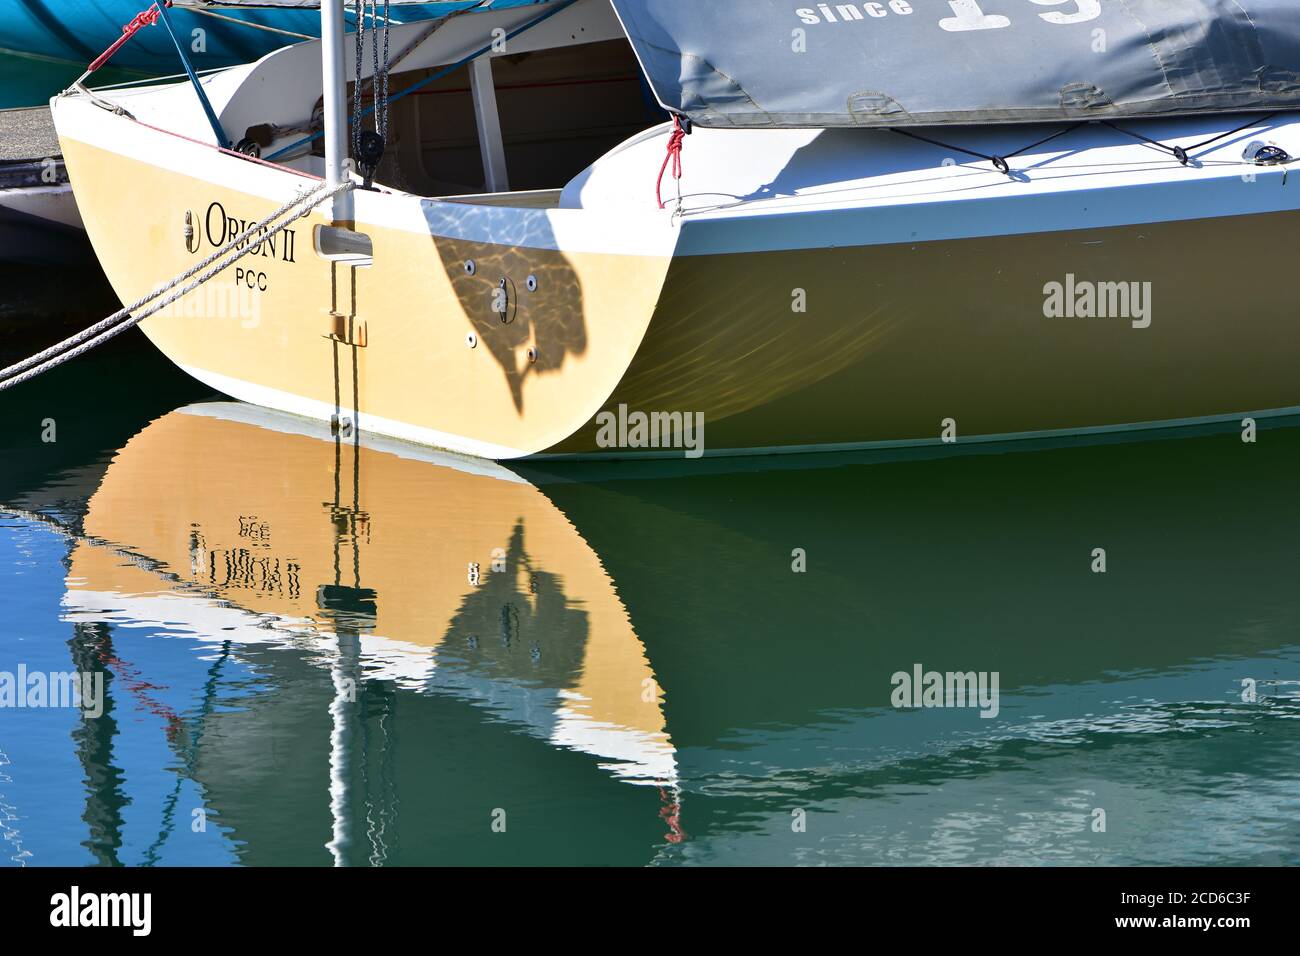 Stern of small sailboat covered with canvas reflecting on calm water surface. Stock Photo